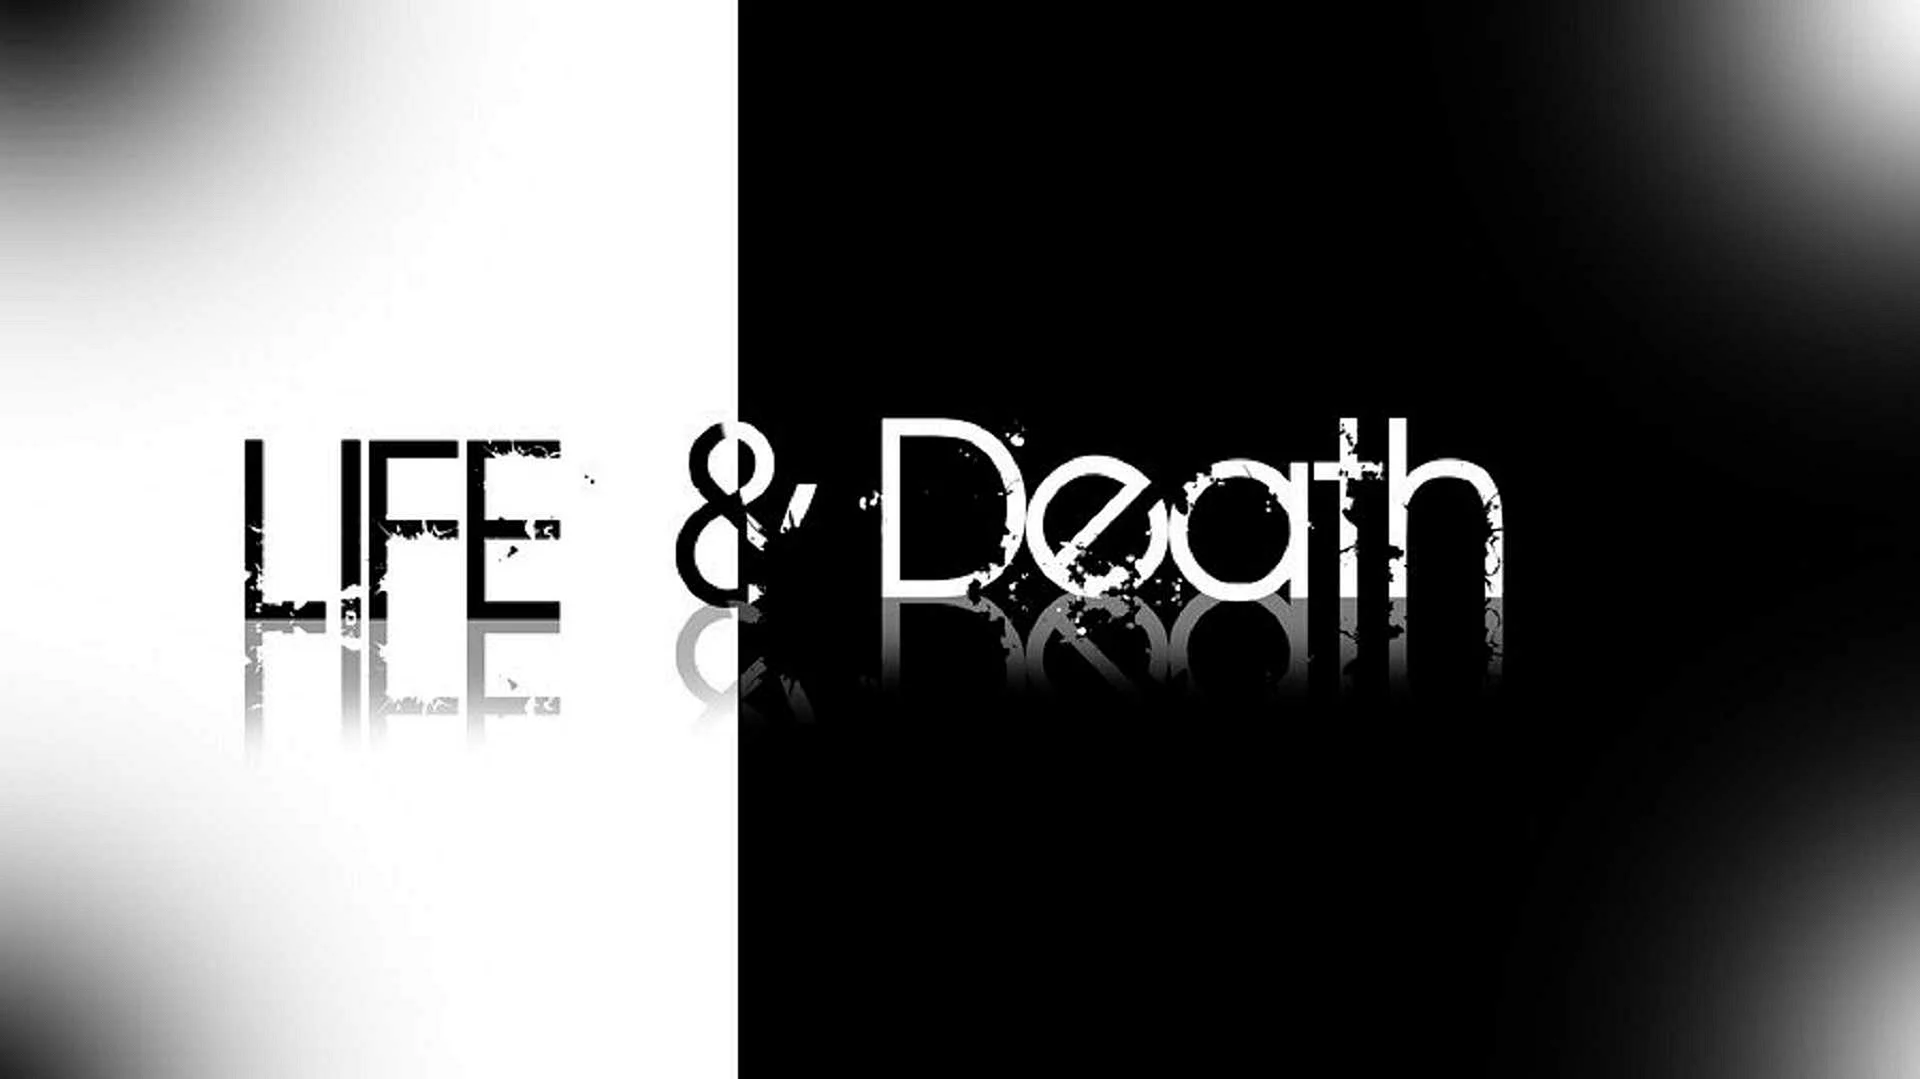 Life is dead. Обои Life Death. Life or Death обои. Обои Death and Life 2k.